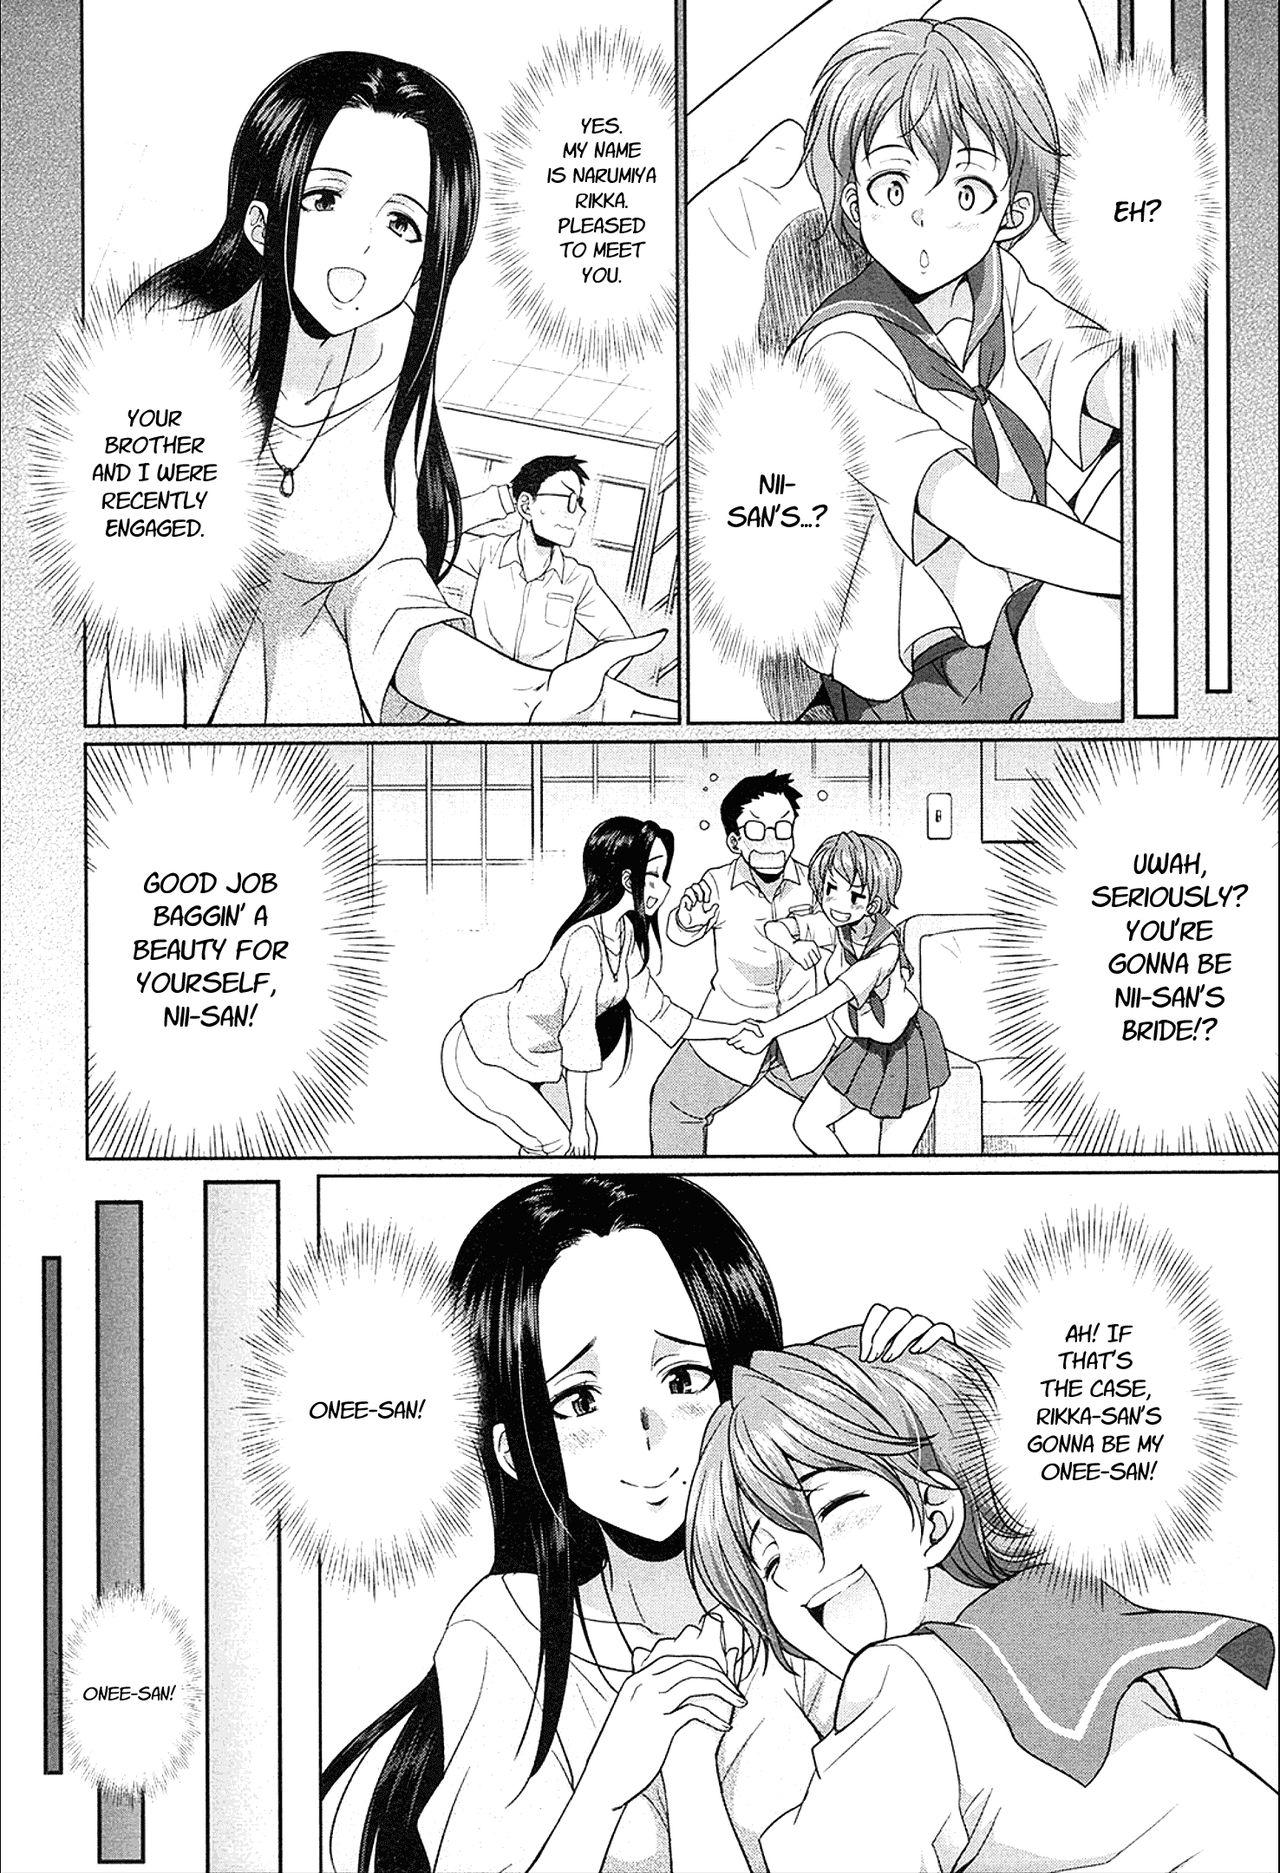 Naughty Gishimai no Kankei The Relationship of the Sisters-in-Law Original Script Uncensored Petite - Page 4